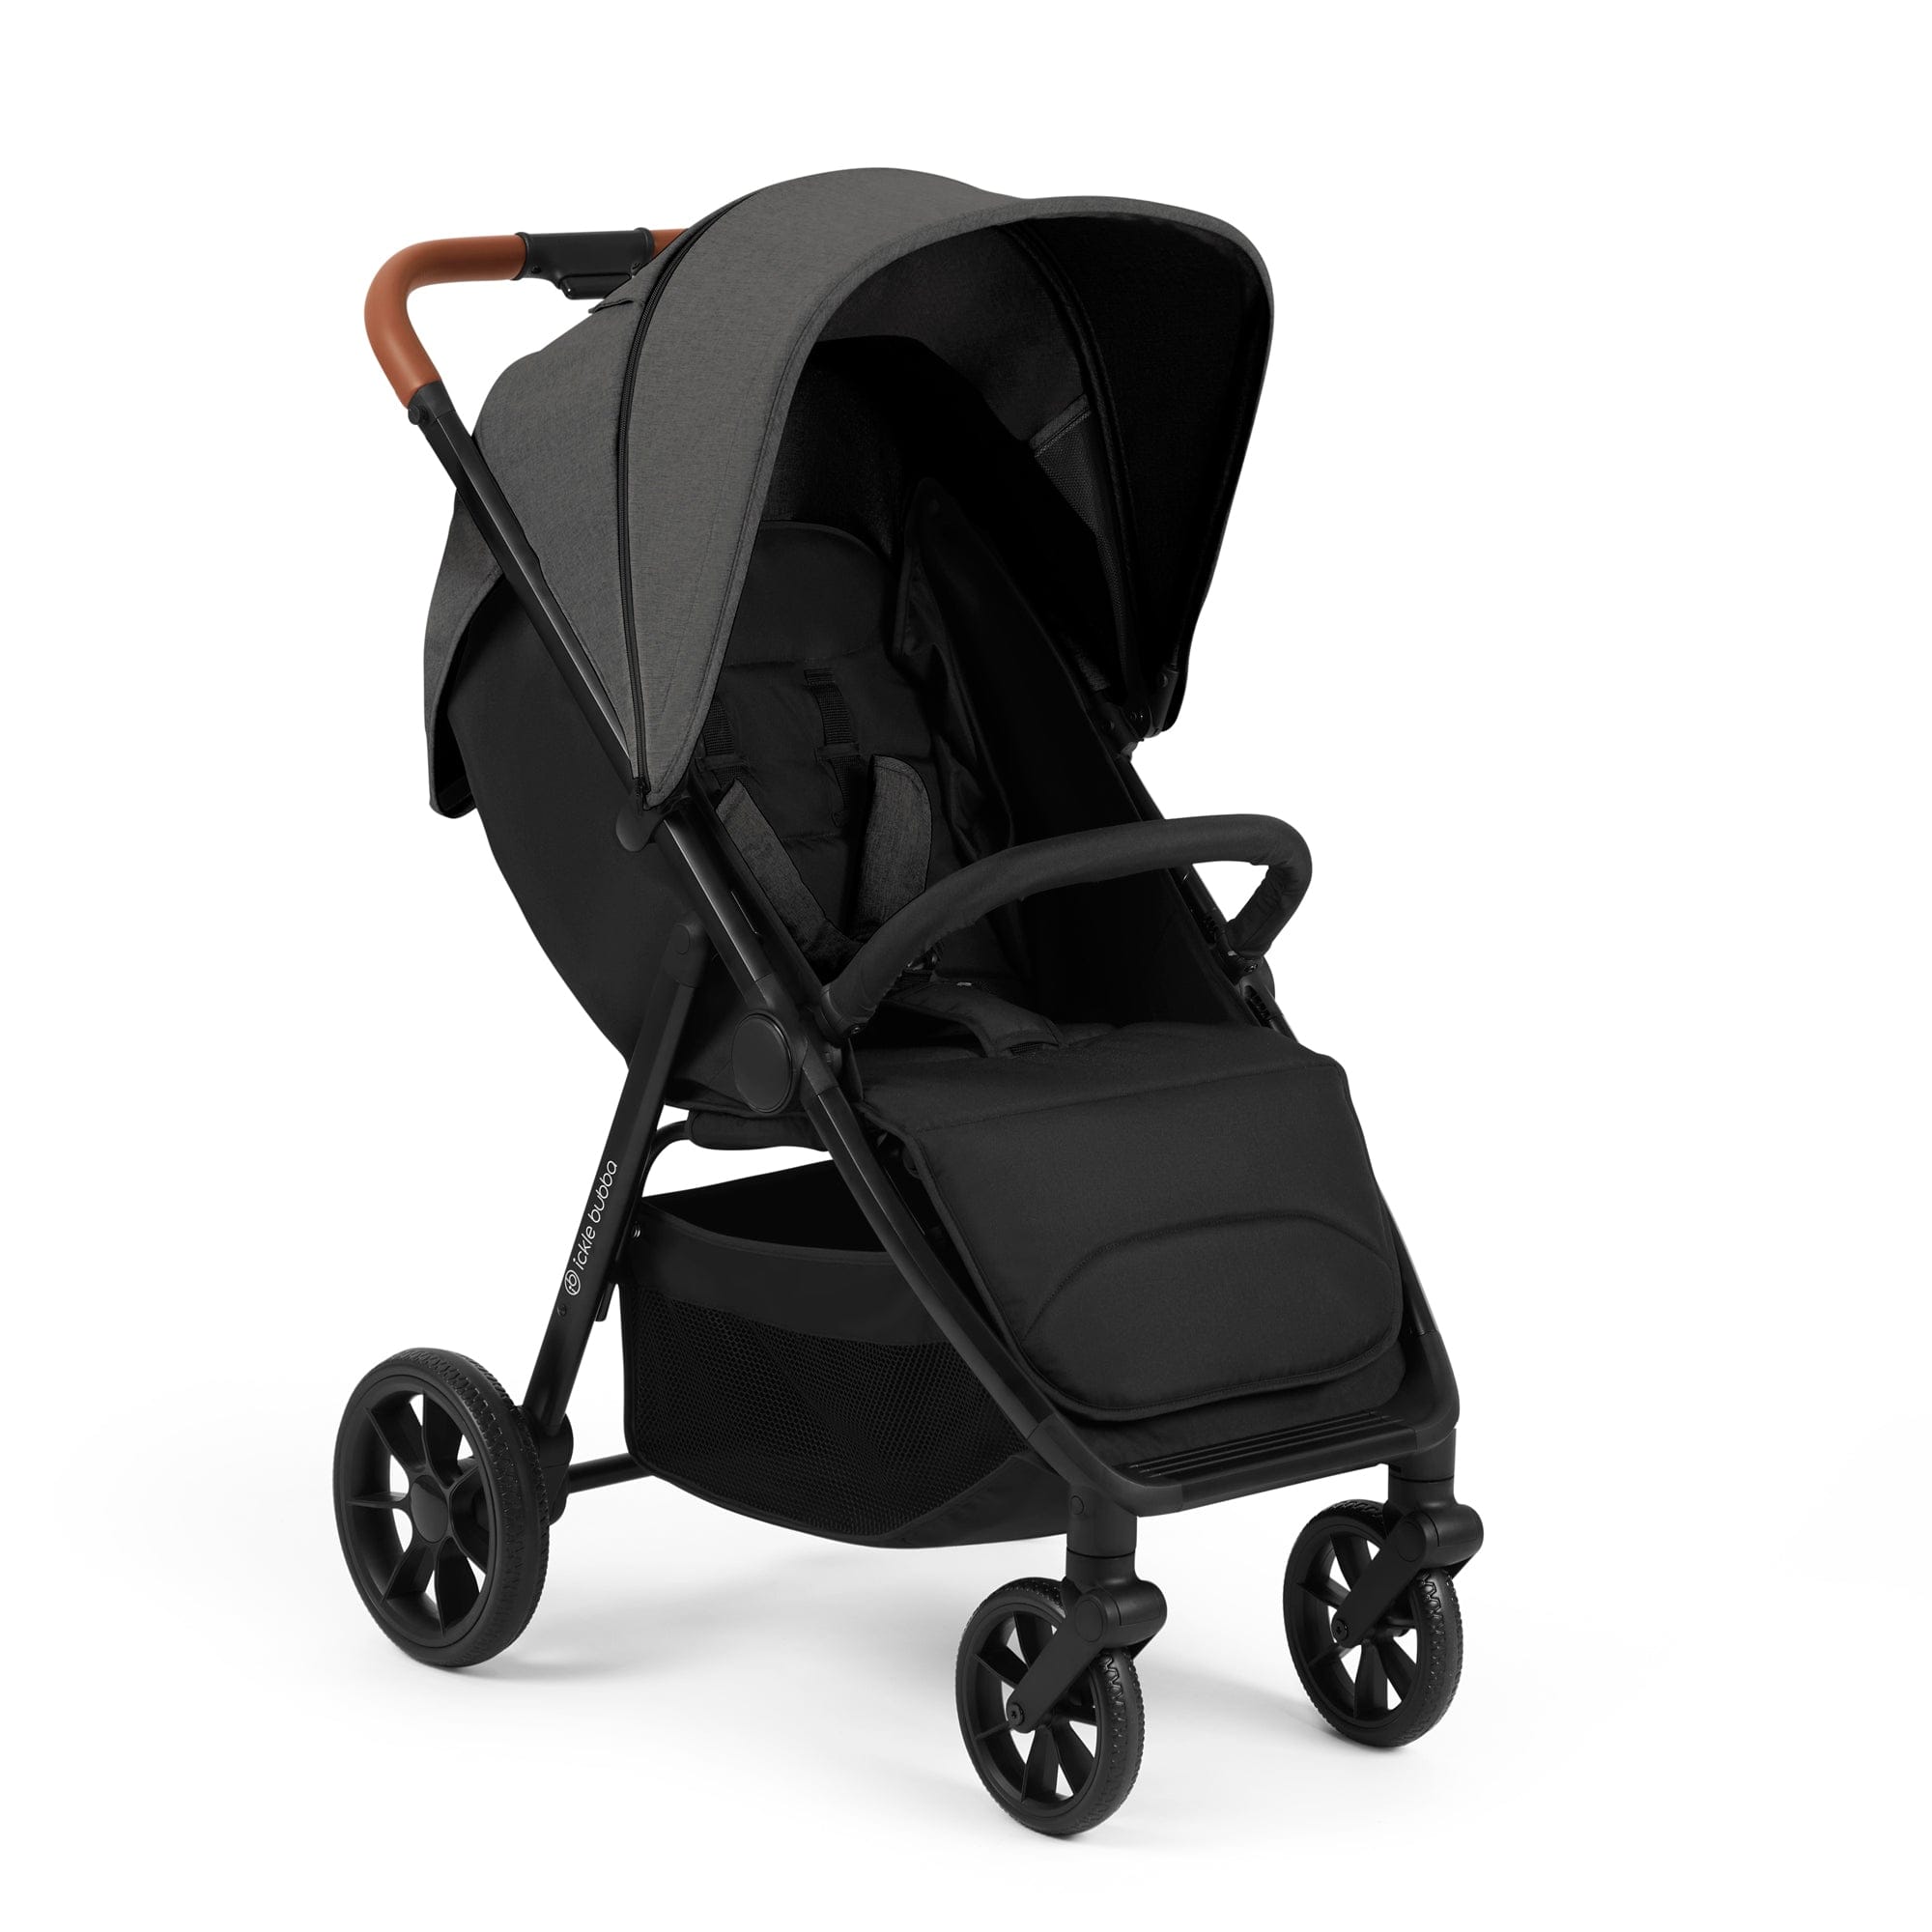 STOMP STRIDE PRIME STROLLER in Charcoal Grey Pushchairs & Buggies 15-006-300-148 5056515033922